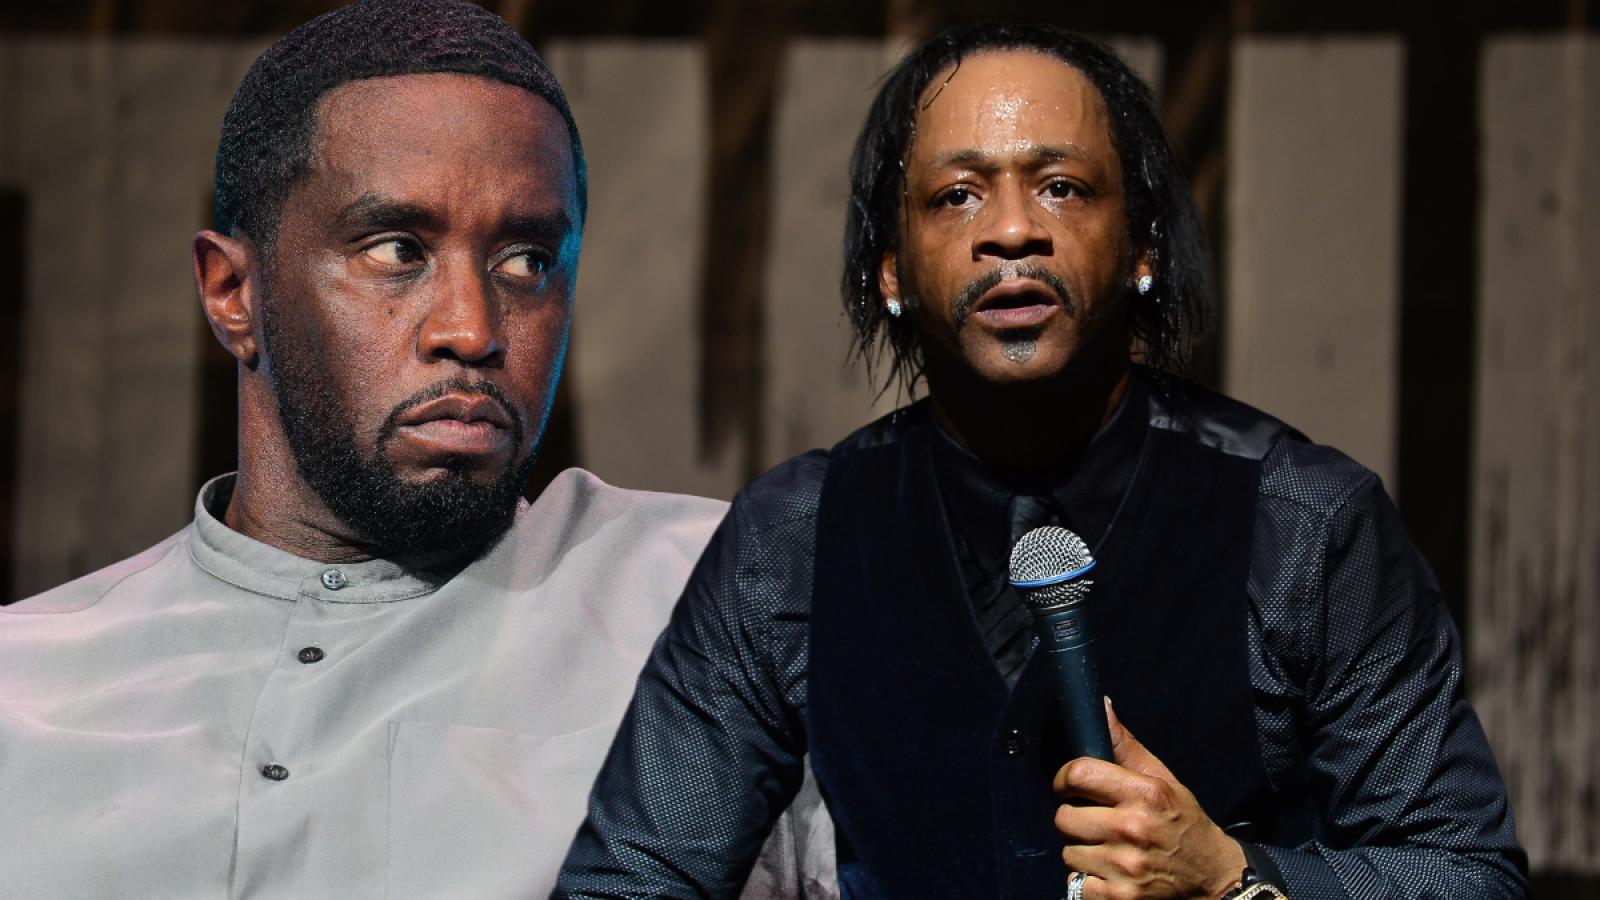 Katt Williams Remarks About Diddy Resurface After Police Raid